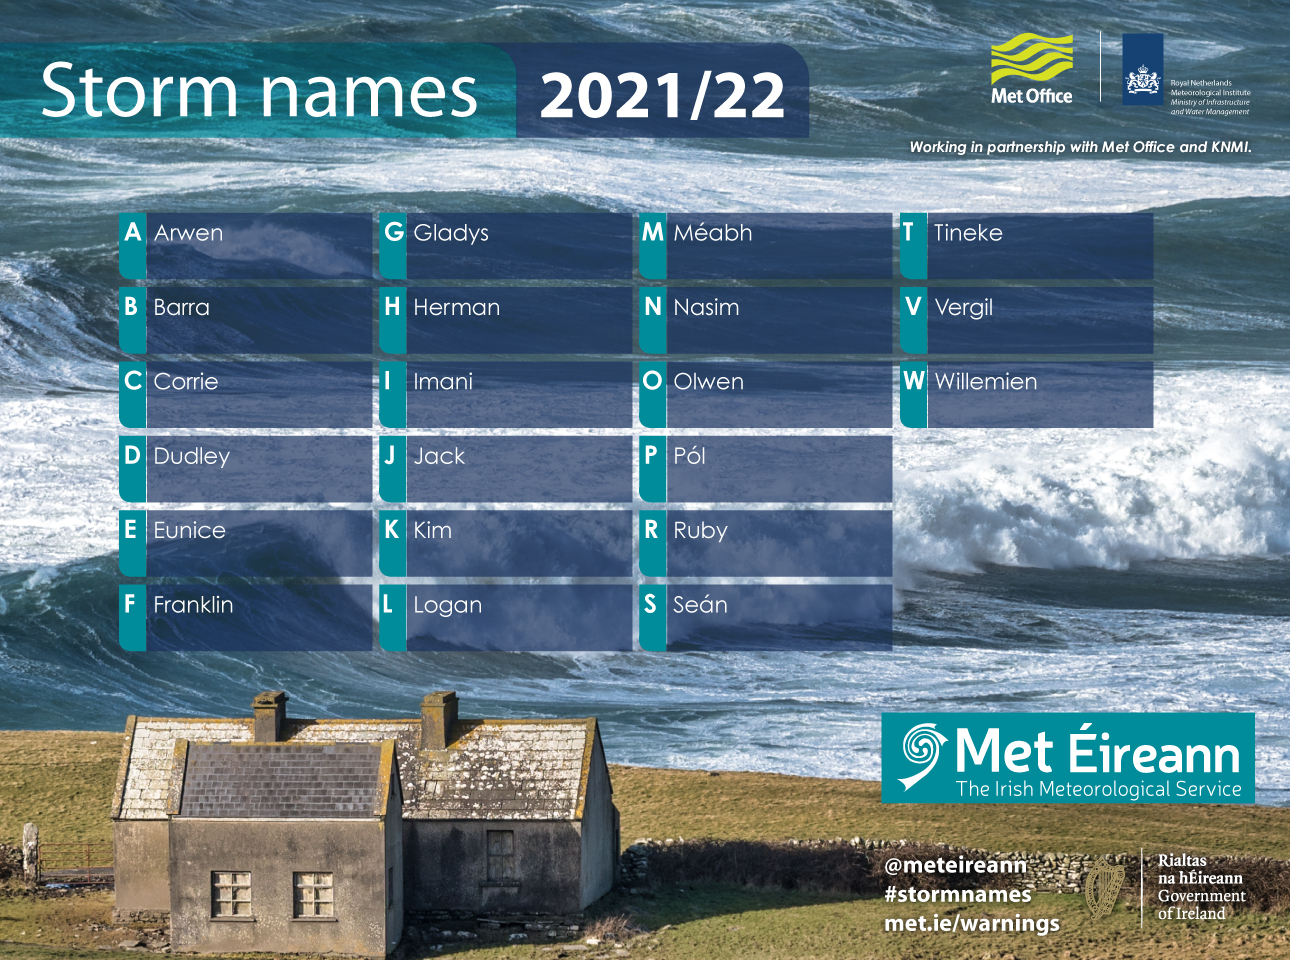 Storm names for 2021-22 in partnership with UK Met Office and KNMI in the Netherlands. The Storm Names are: Arwen, Barra, Corrie, Dudley, Eunice, Franklin, Gladys, Herman, Imani, Jack, Kim, Logan, Méabh, Nasim, Olwen, Pól, Ruby, Seán, Tineke, Vergil, Willemien.